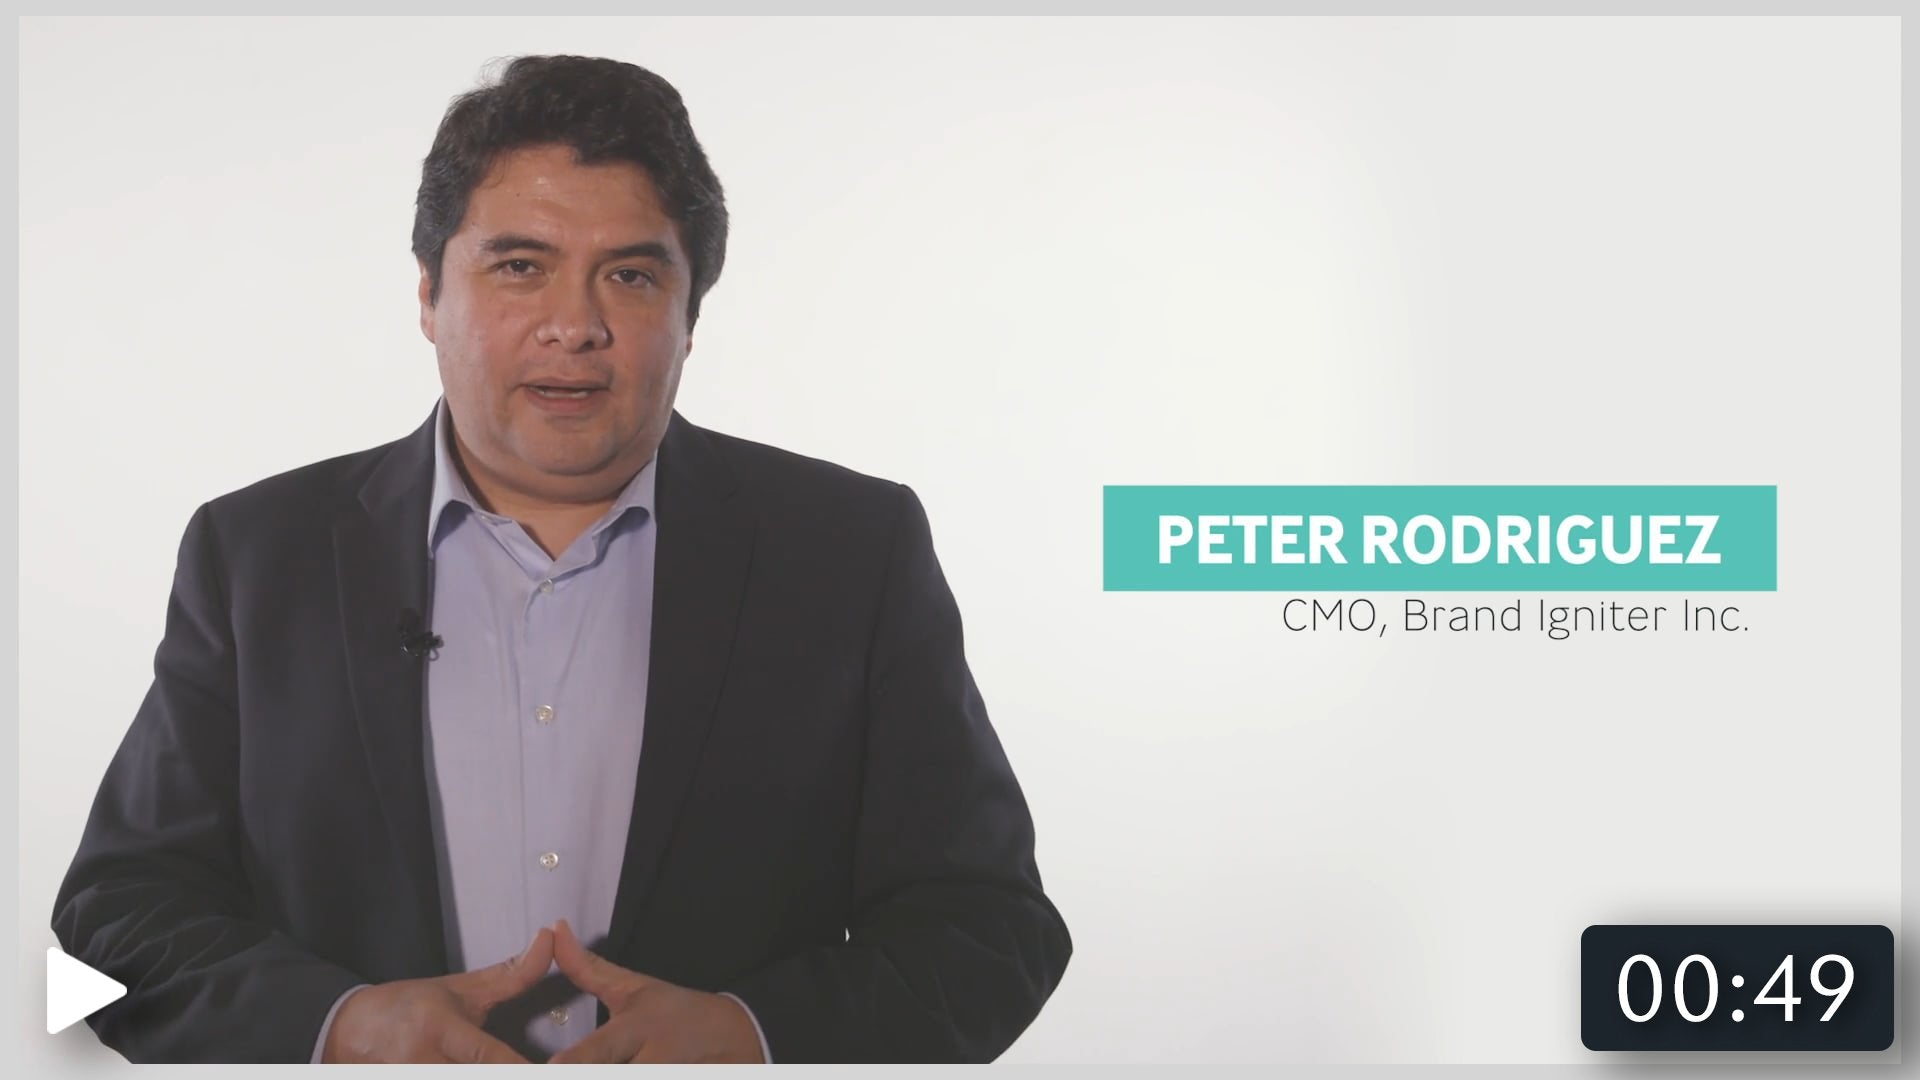 Meet Peter Rodriguez who shares how to create a strong personal and professional brand